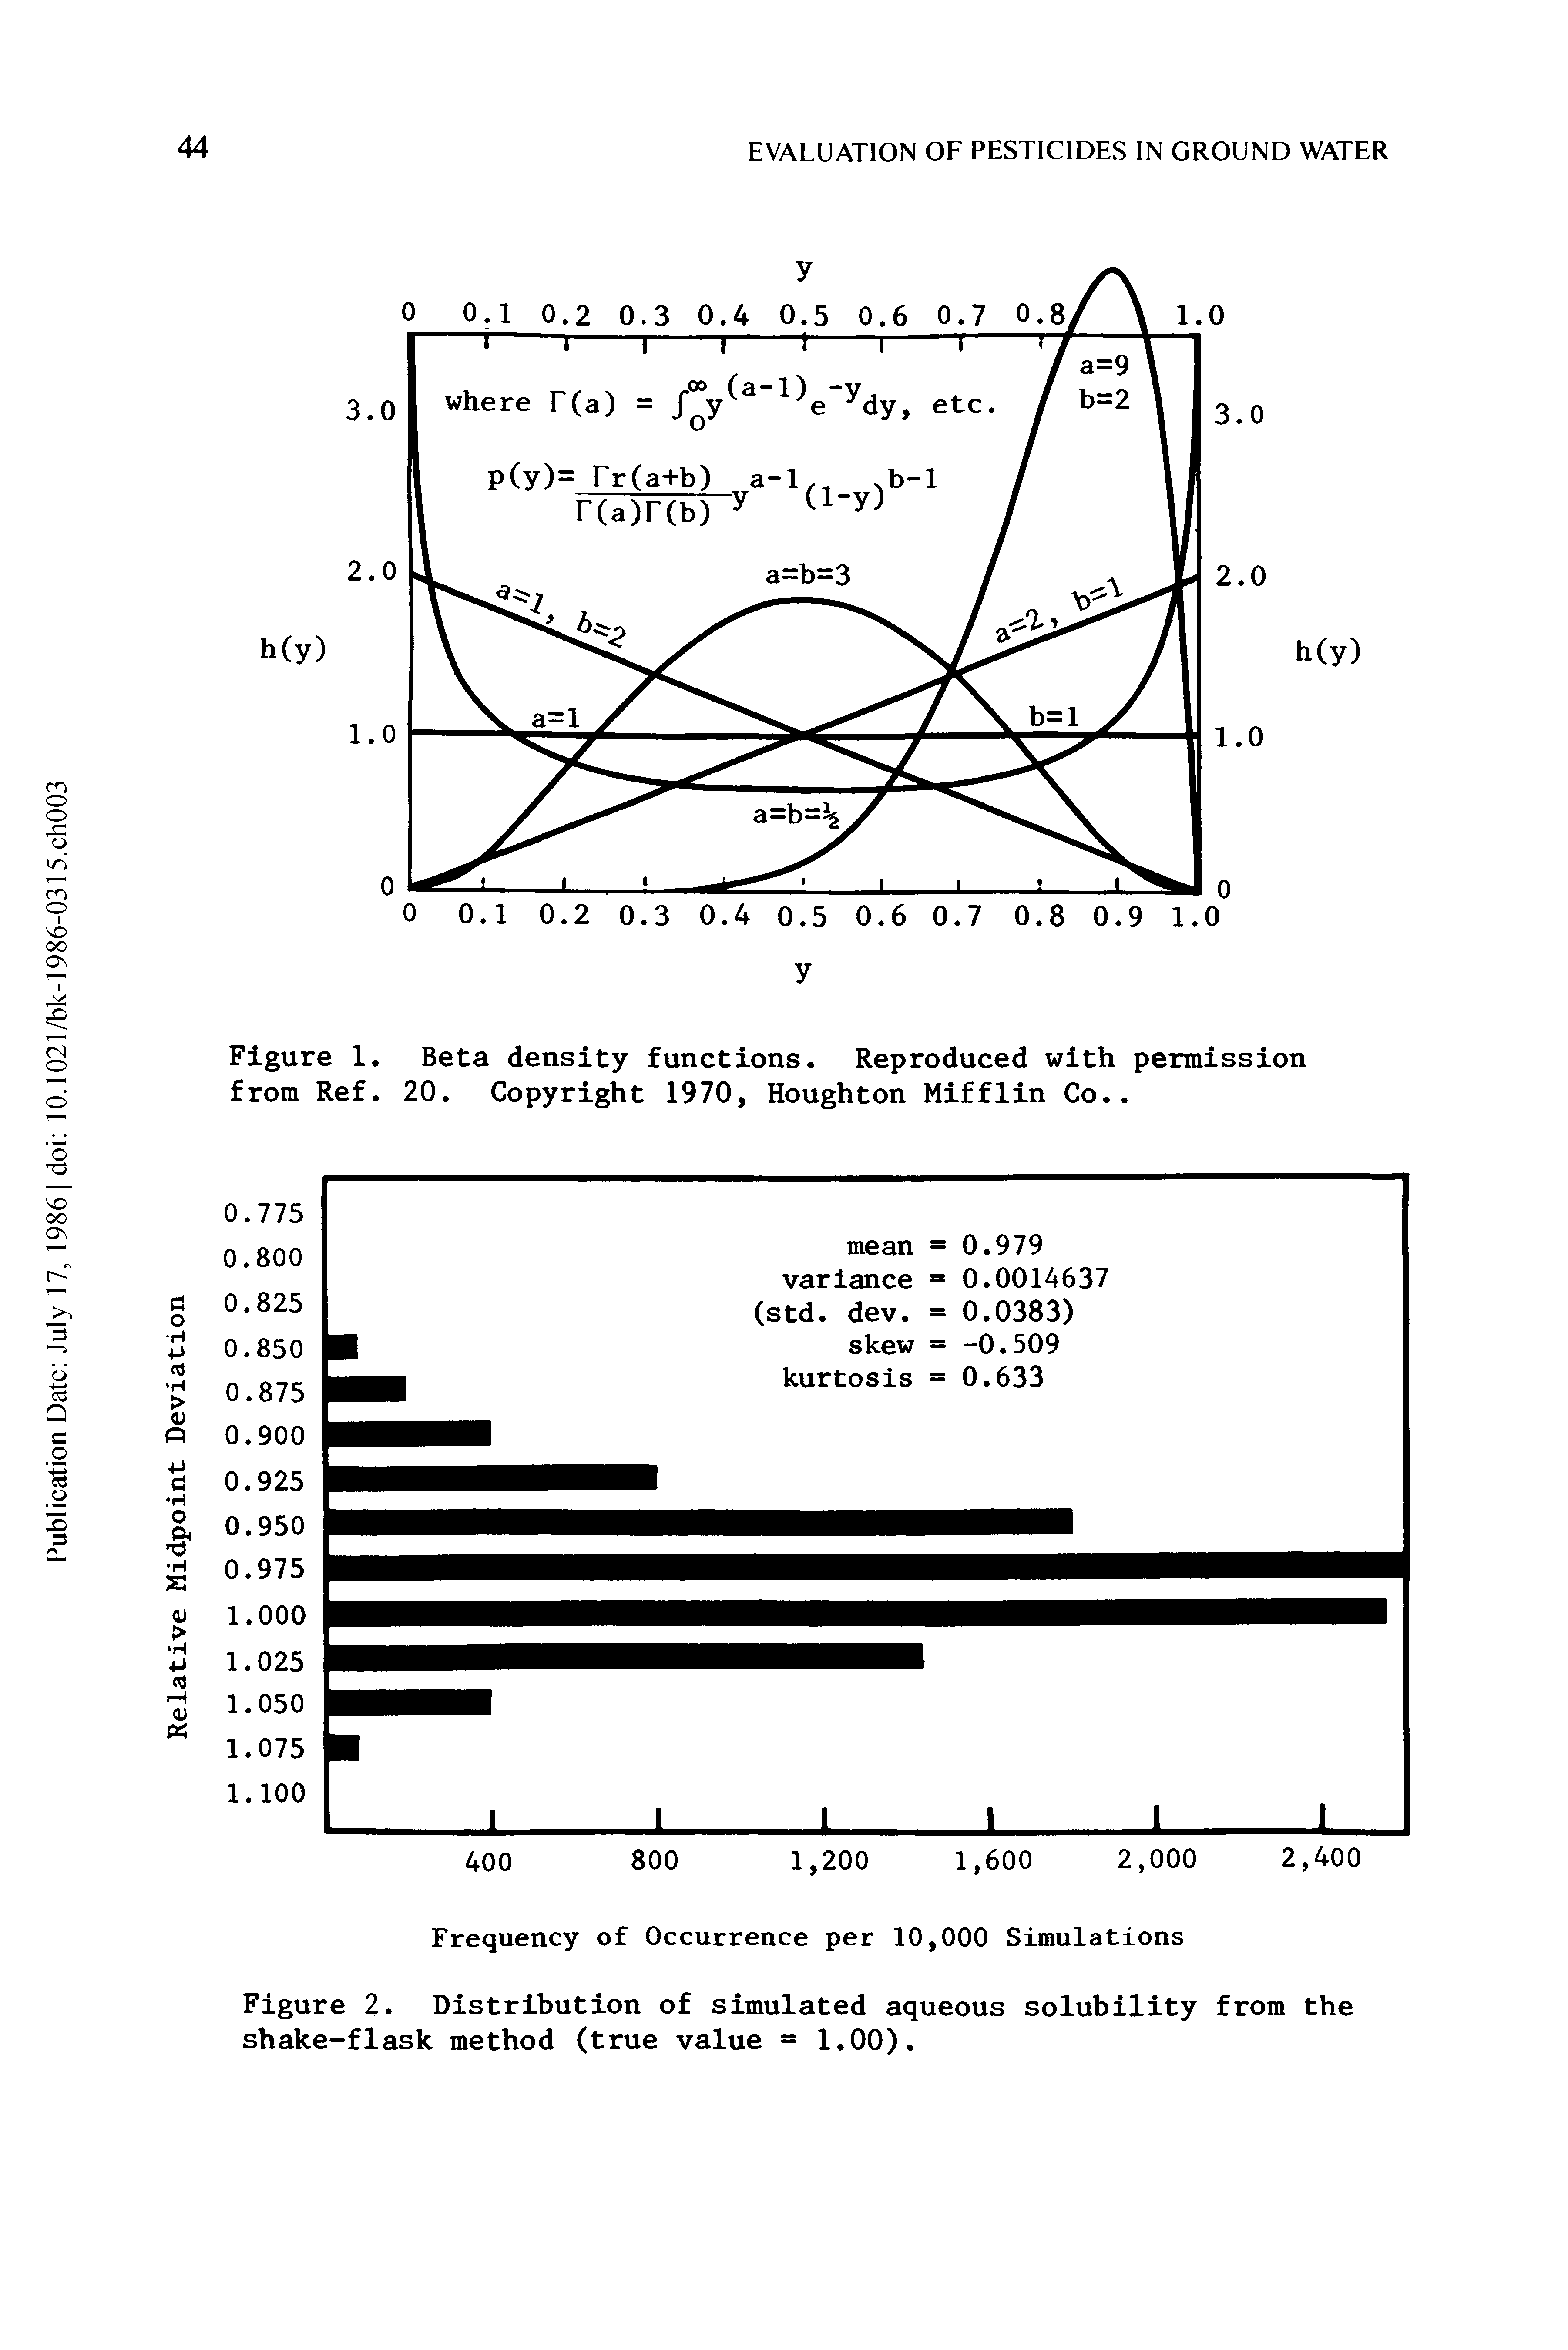 Figure 1. Beta density functions. Reproduced with permission from Ref. 20. Copyright 1970, Houghton Mifflin Co..